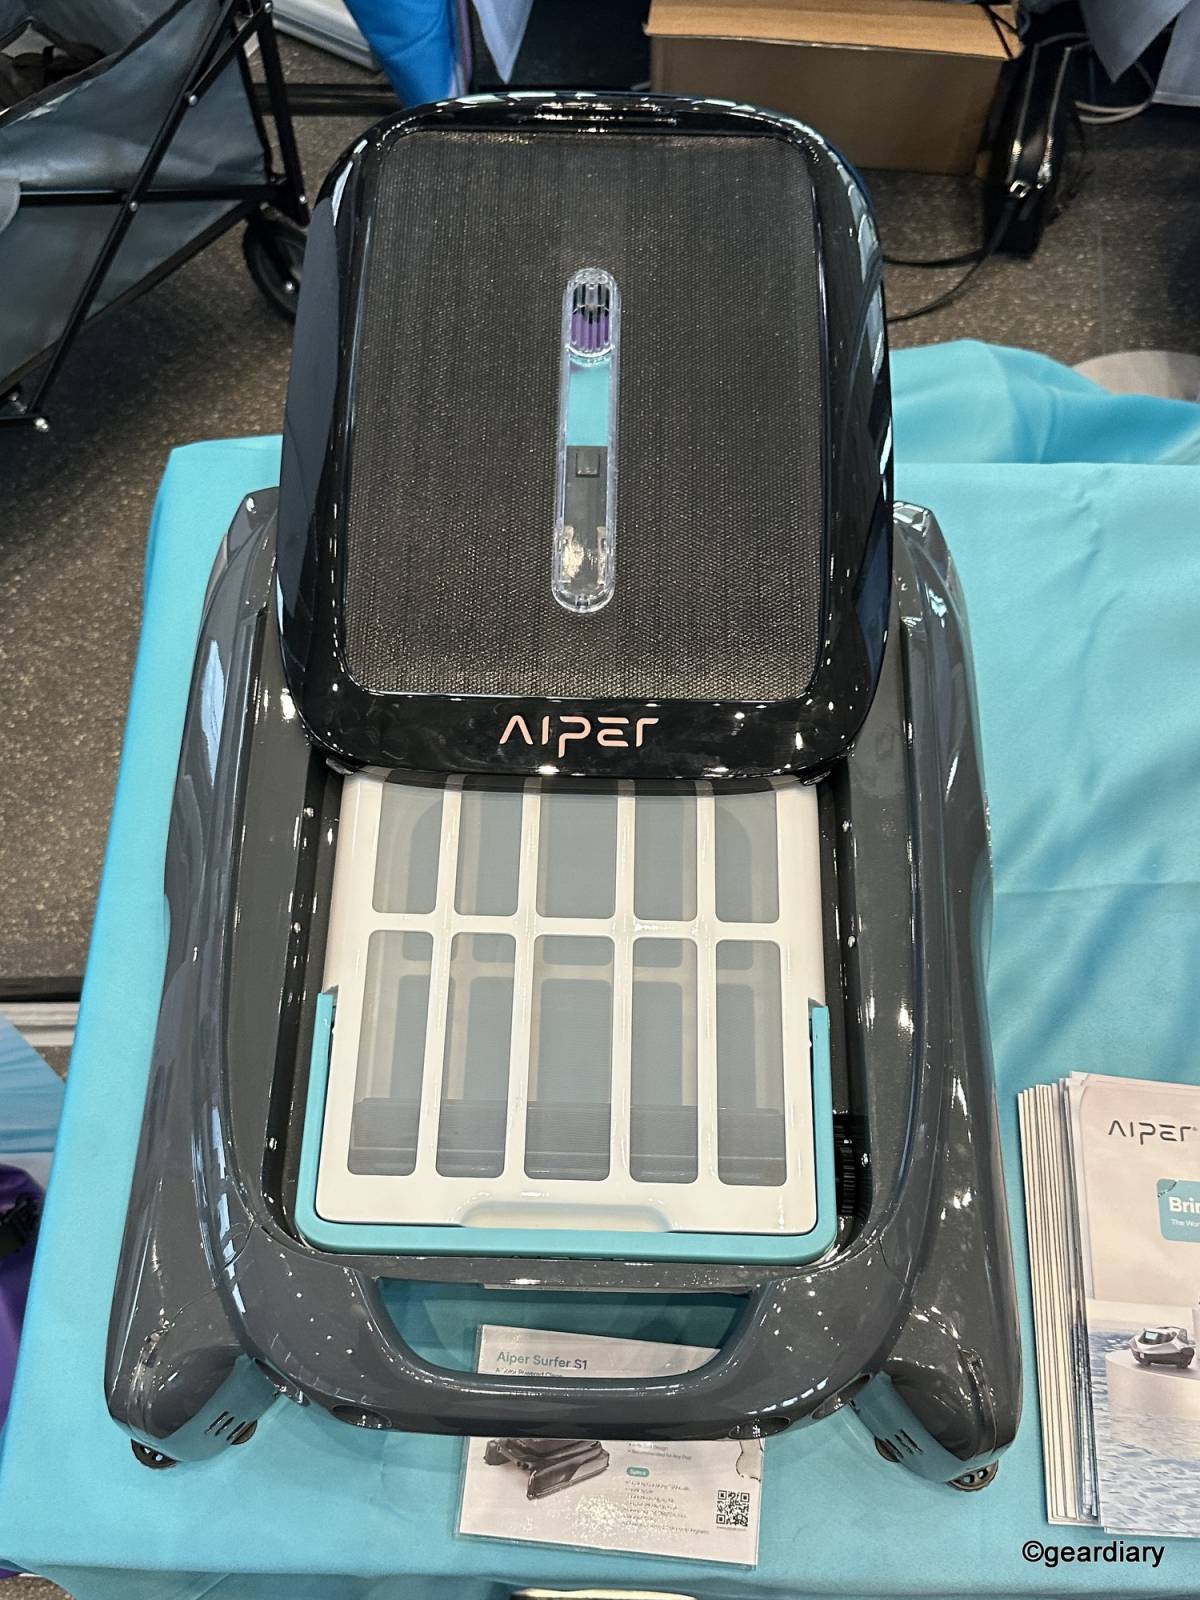 The Aiper Surfer S1 Solar Pool Skimmer at IFA's Showstopper's Event